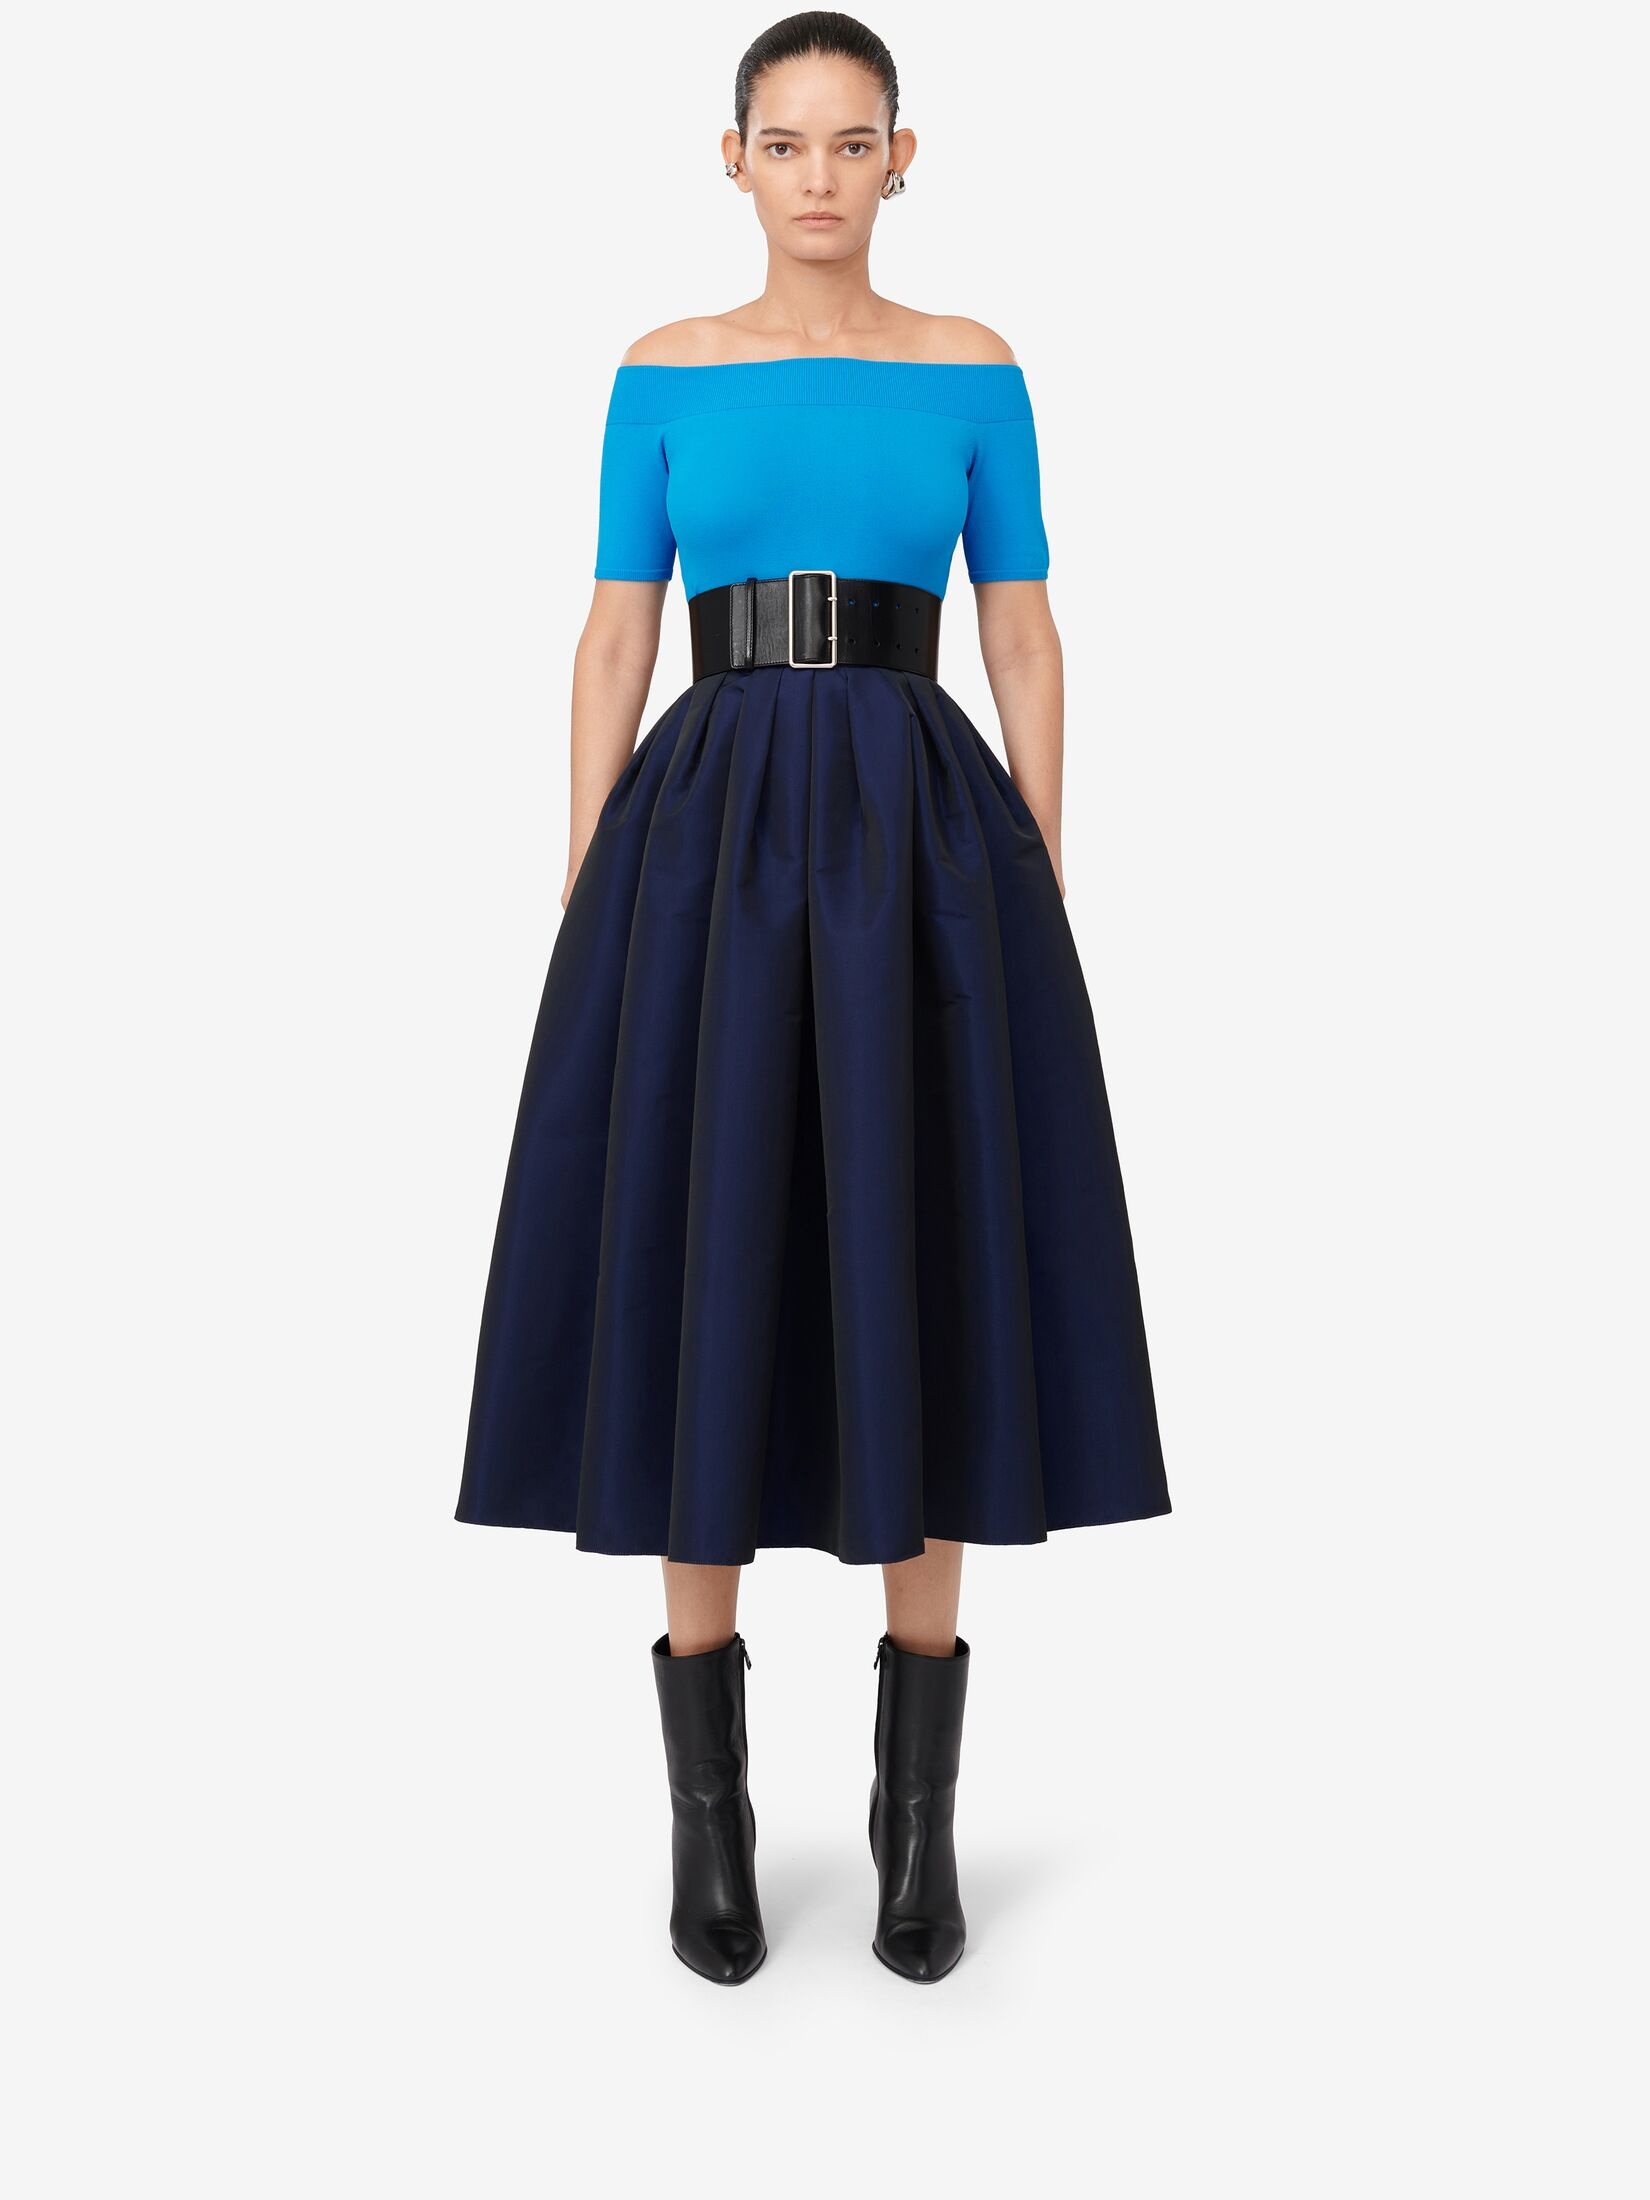 Women's Pleated Midi Skirt in Electric Navy - 2